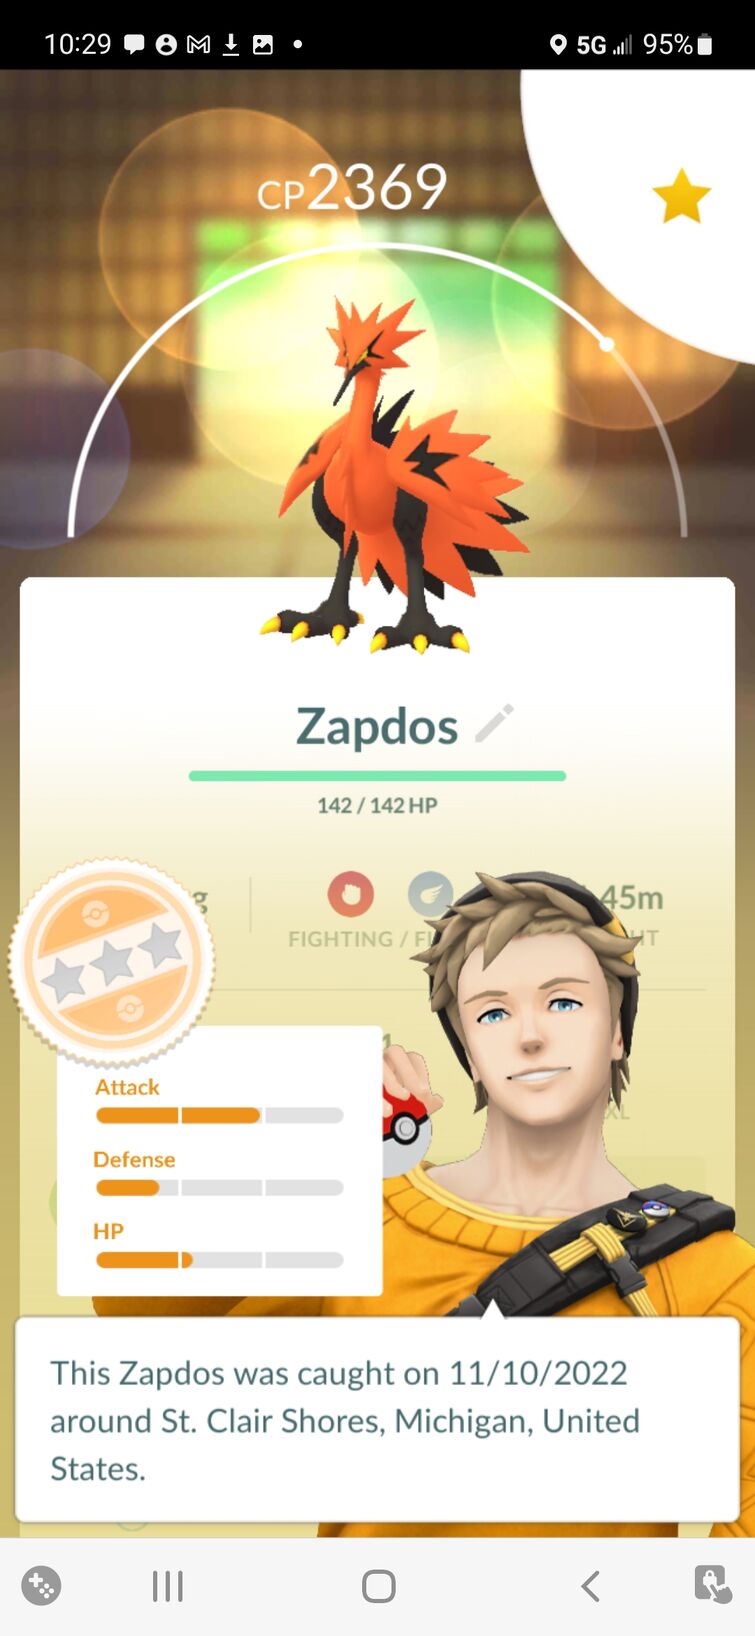 pogo] didn't catch any Shiny Articuno and Shiny Zapdos during